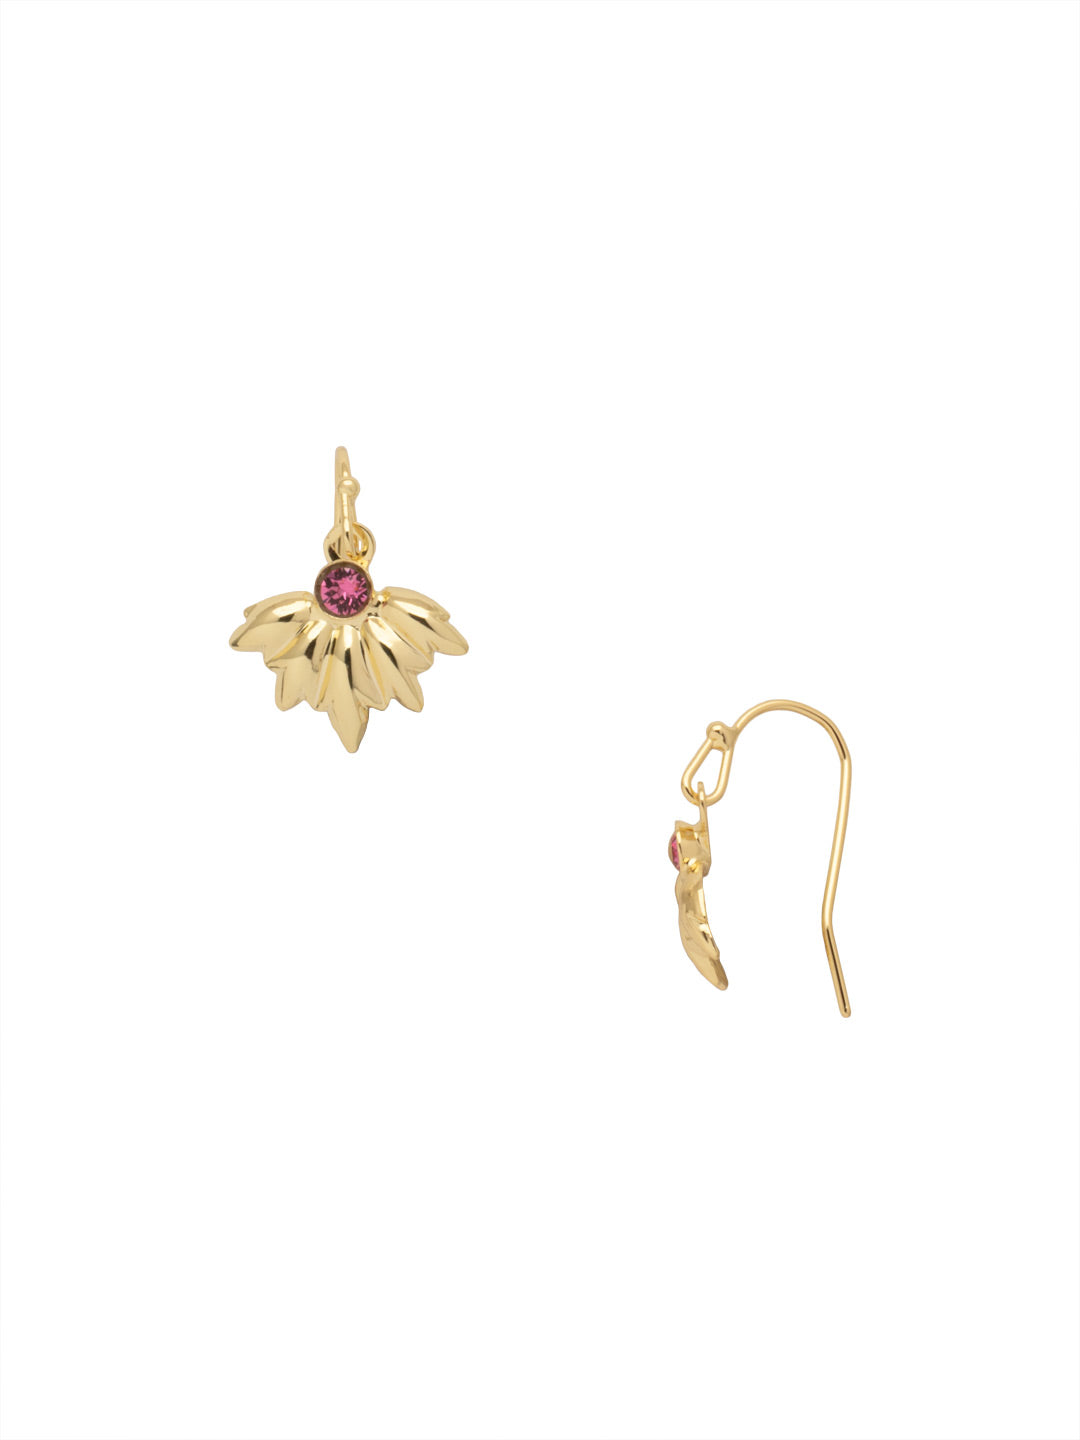 Twin Flame Dangle Earrings - EFE22BGFSK - <p>The Twin Flame Dangle Earrings feature a metal flame detail and a single crystal embellishment on a classic French wire. From Sorrelli's First Kiss collection in our Bright Gold-tone finish.</p>